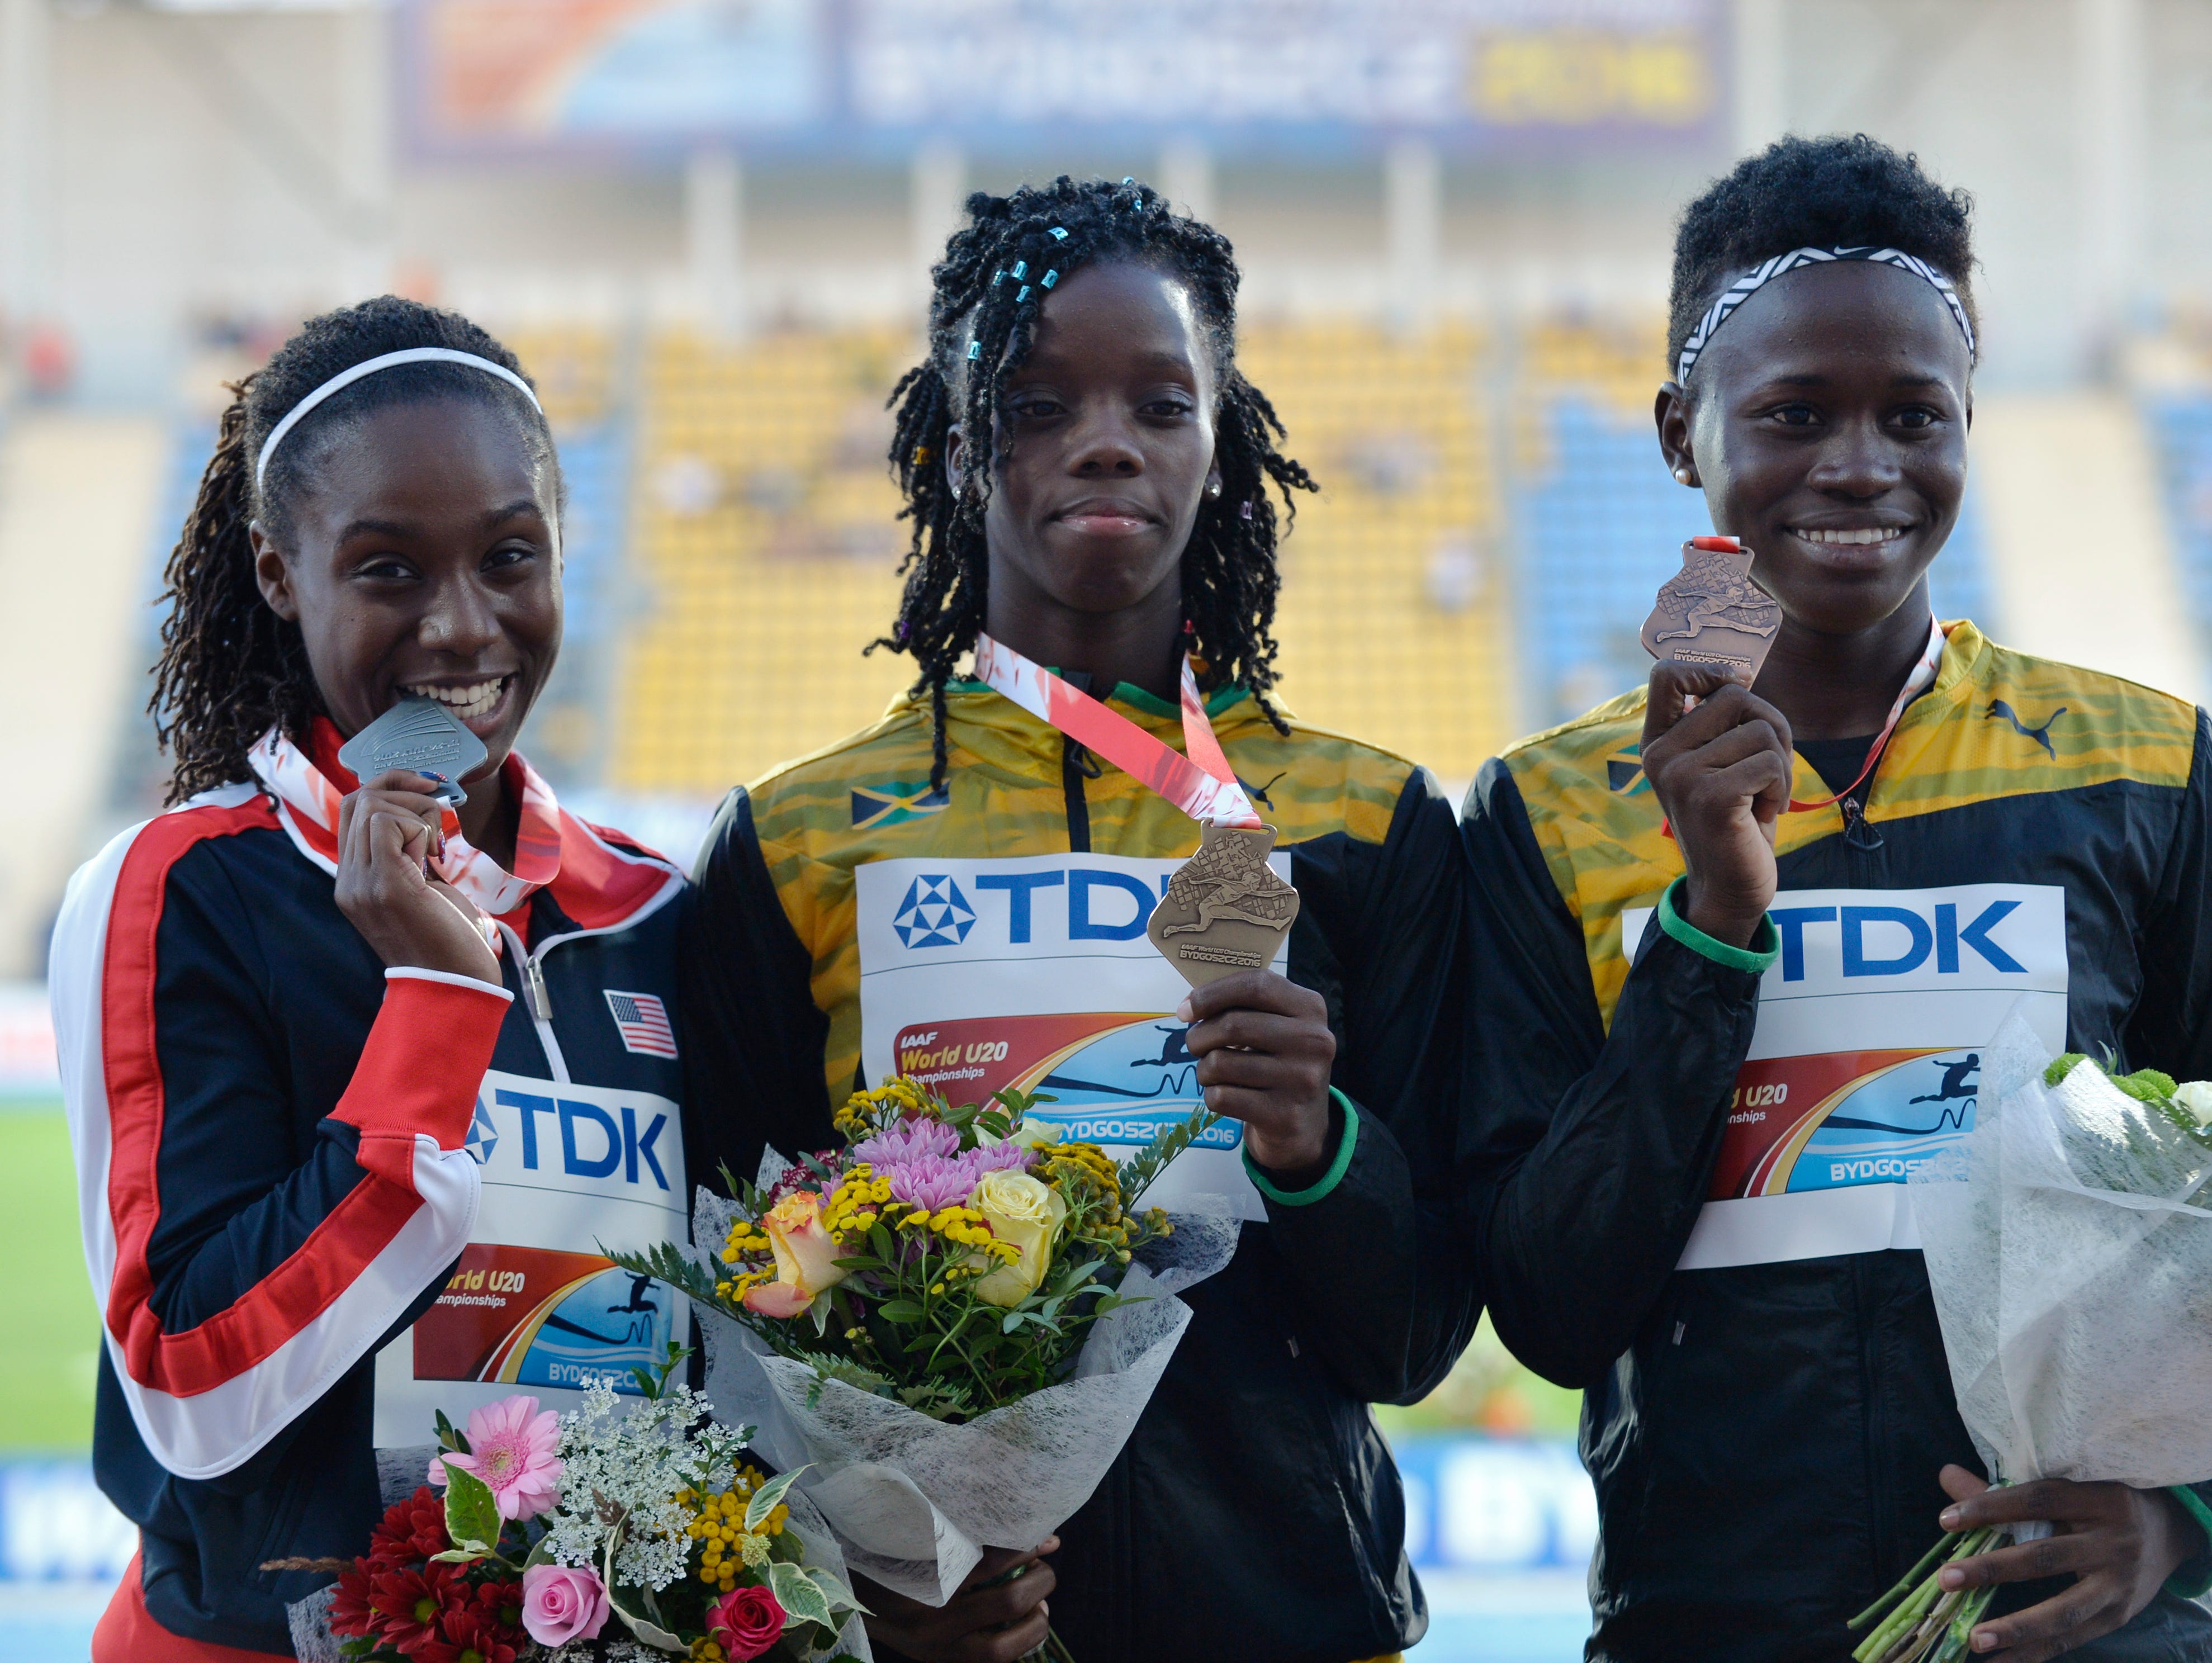 BYDGOSZCZ, POLAND - JULY 21: Lynna Irby from USA, Tiffany James from Jamaica and Junelle Bromfield from Jamaica on the podium after women's 400 metres during the IAAF World U20 Championships at the Zawisza Stadium on July 21, 2016 in Bydgoszcz, Poland.